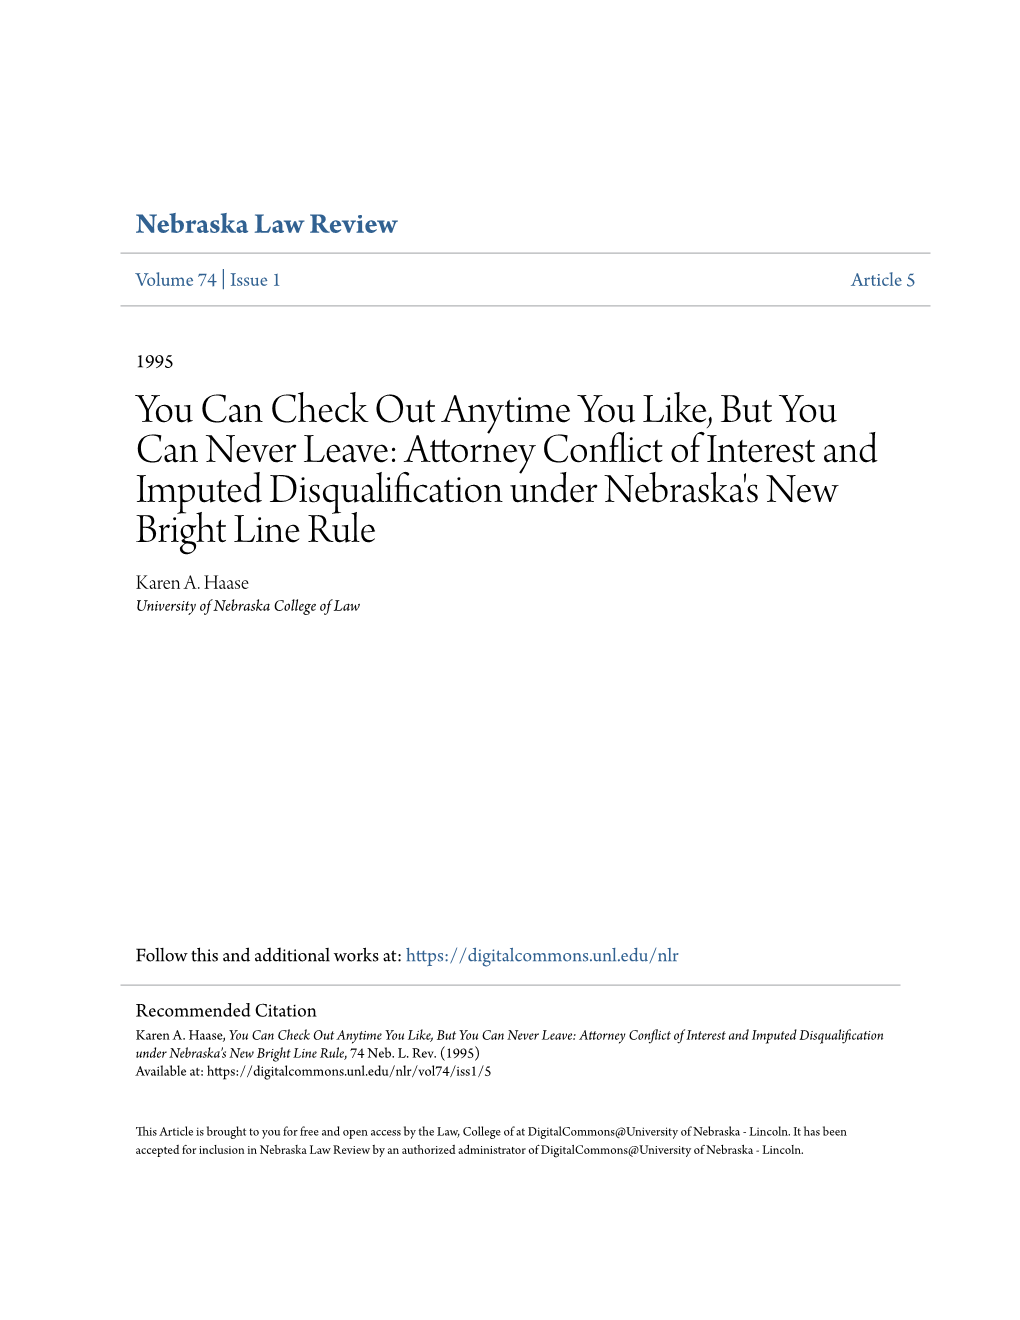 Attorney Conflict of Interest and Imputed Disqualification Under Nebraska's New Bright Line Rule Karen A